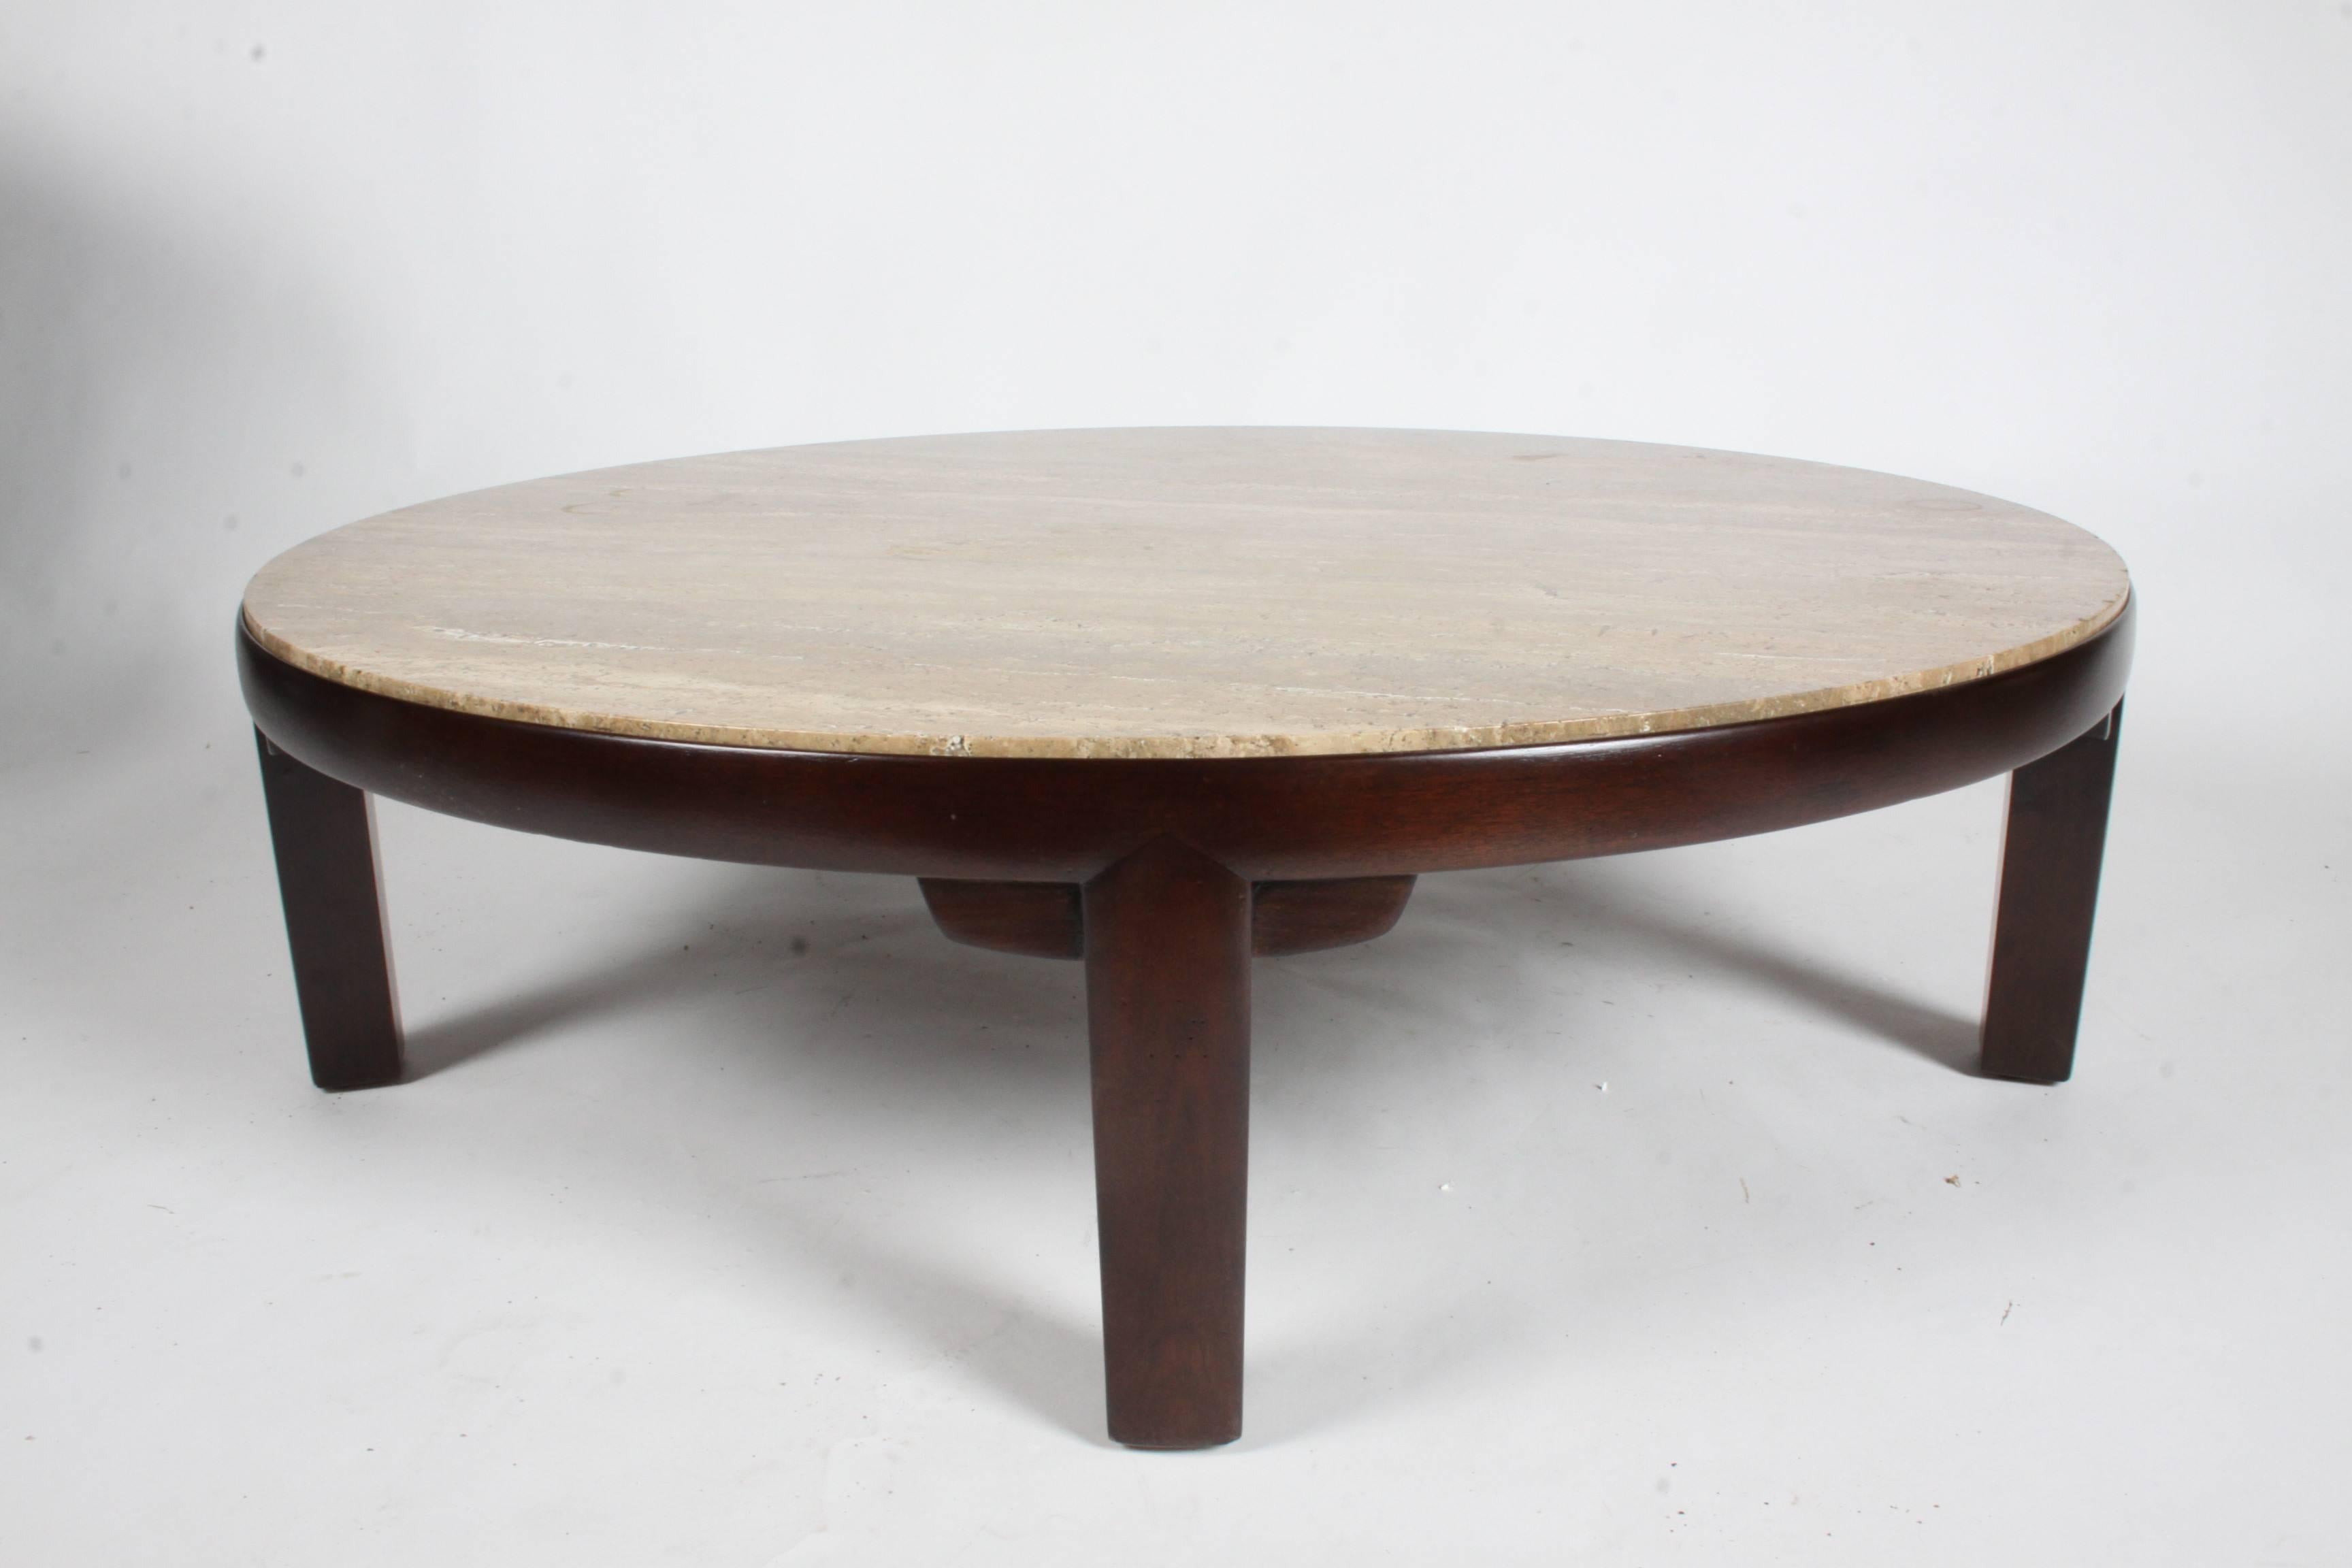 Mid-20th Century Large Edward Wormley for Dunbar Round Coffee Table with Walnut Roman Travertine